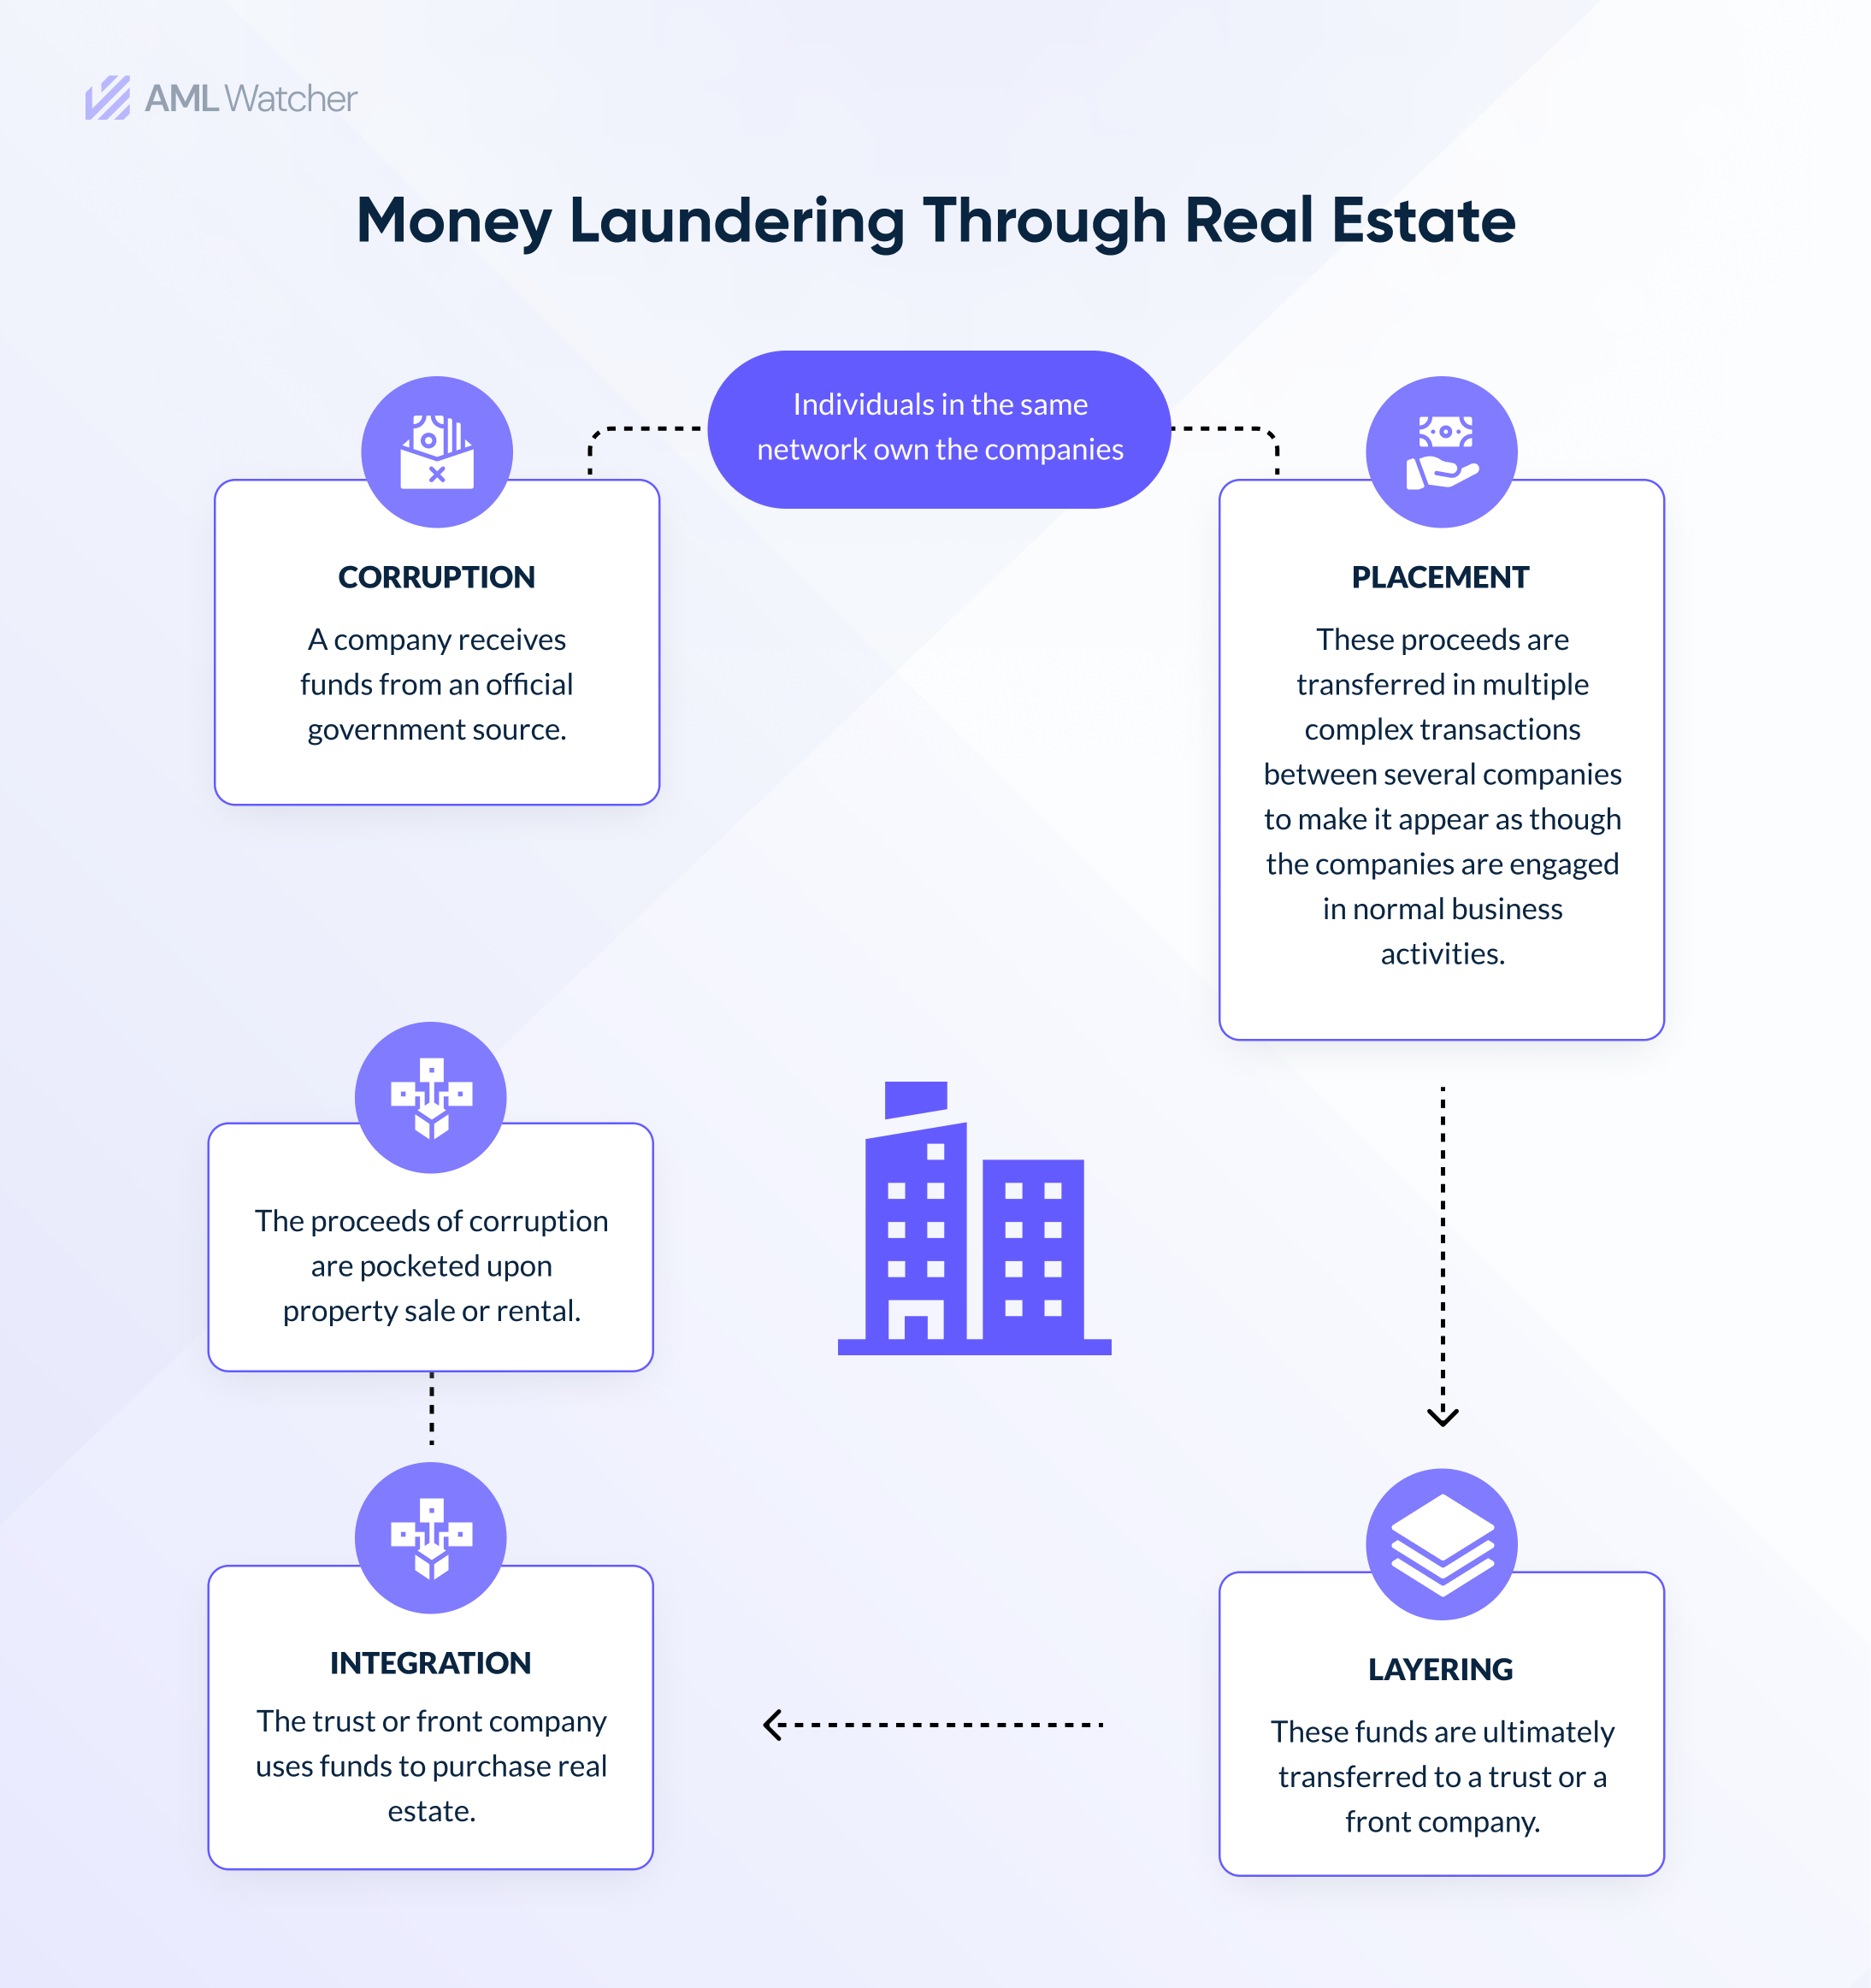 This image shows the process of money laundering through the real estate sector. 